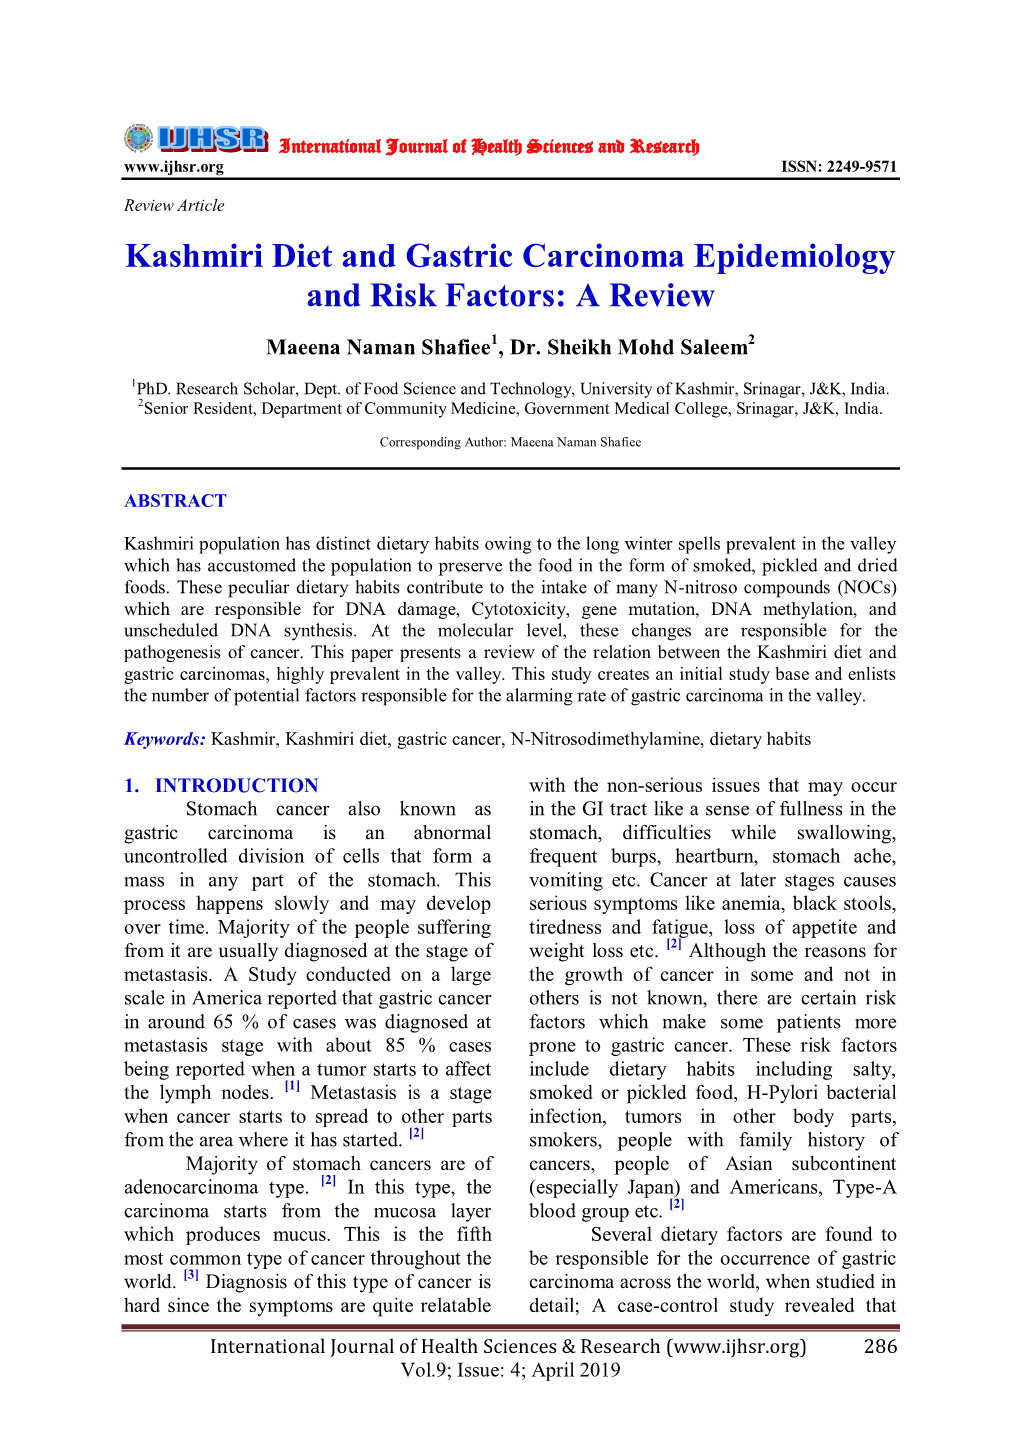 Kashmiri Diet and Gastric Carcinoma Epidemiology and Risk Factors: a Review